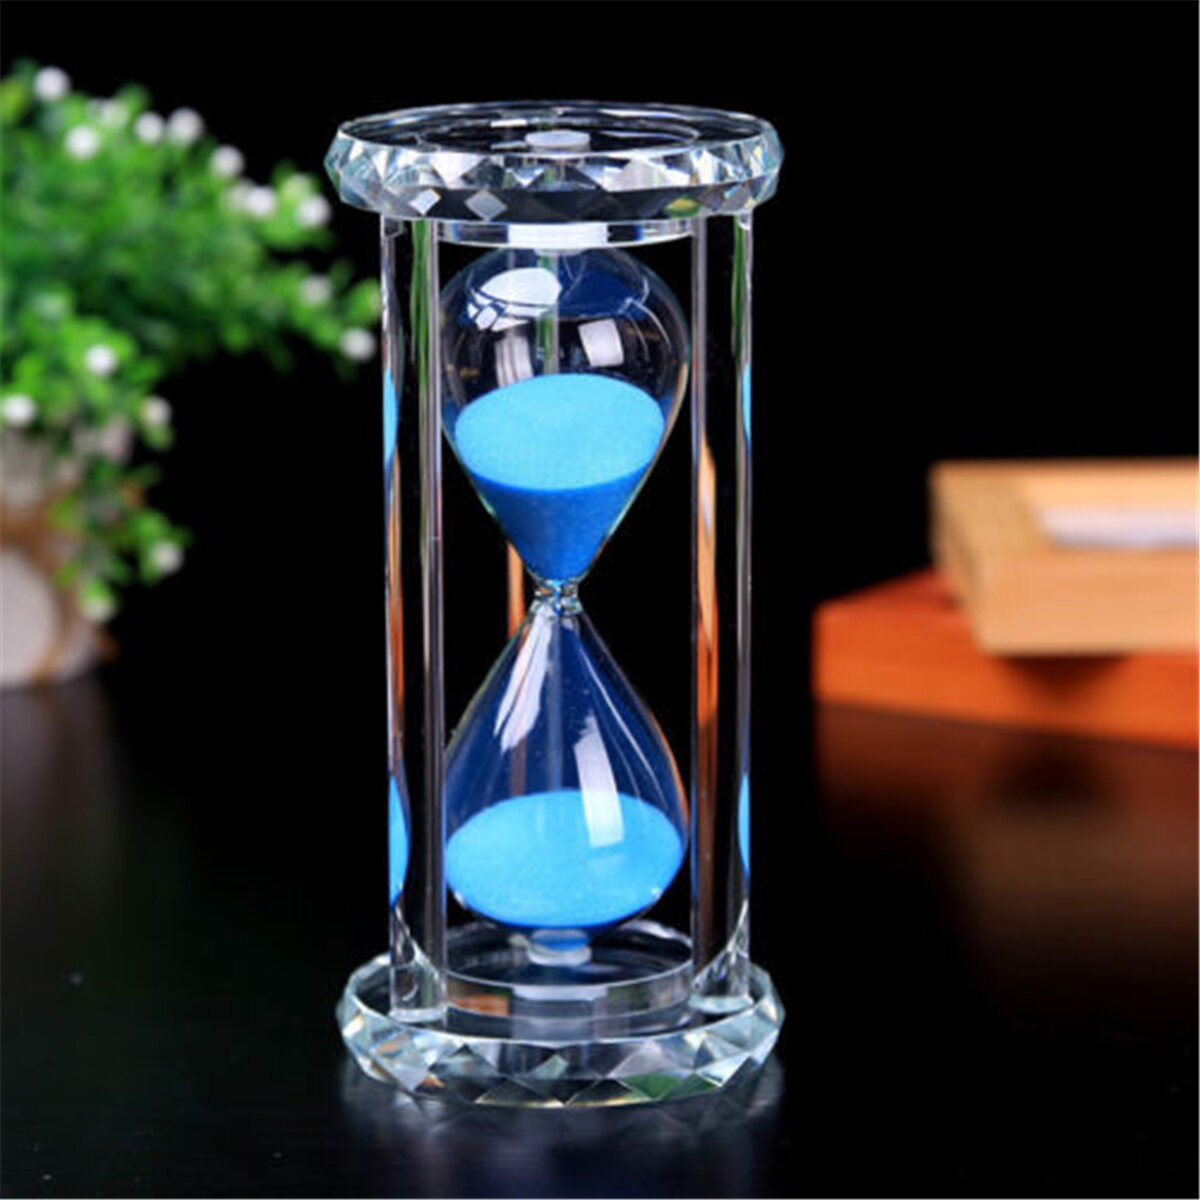 

30 Minutes Hourglass Sandglass Sand Timer Clock Home Office Decorations Valentine Gift